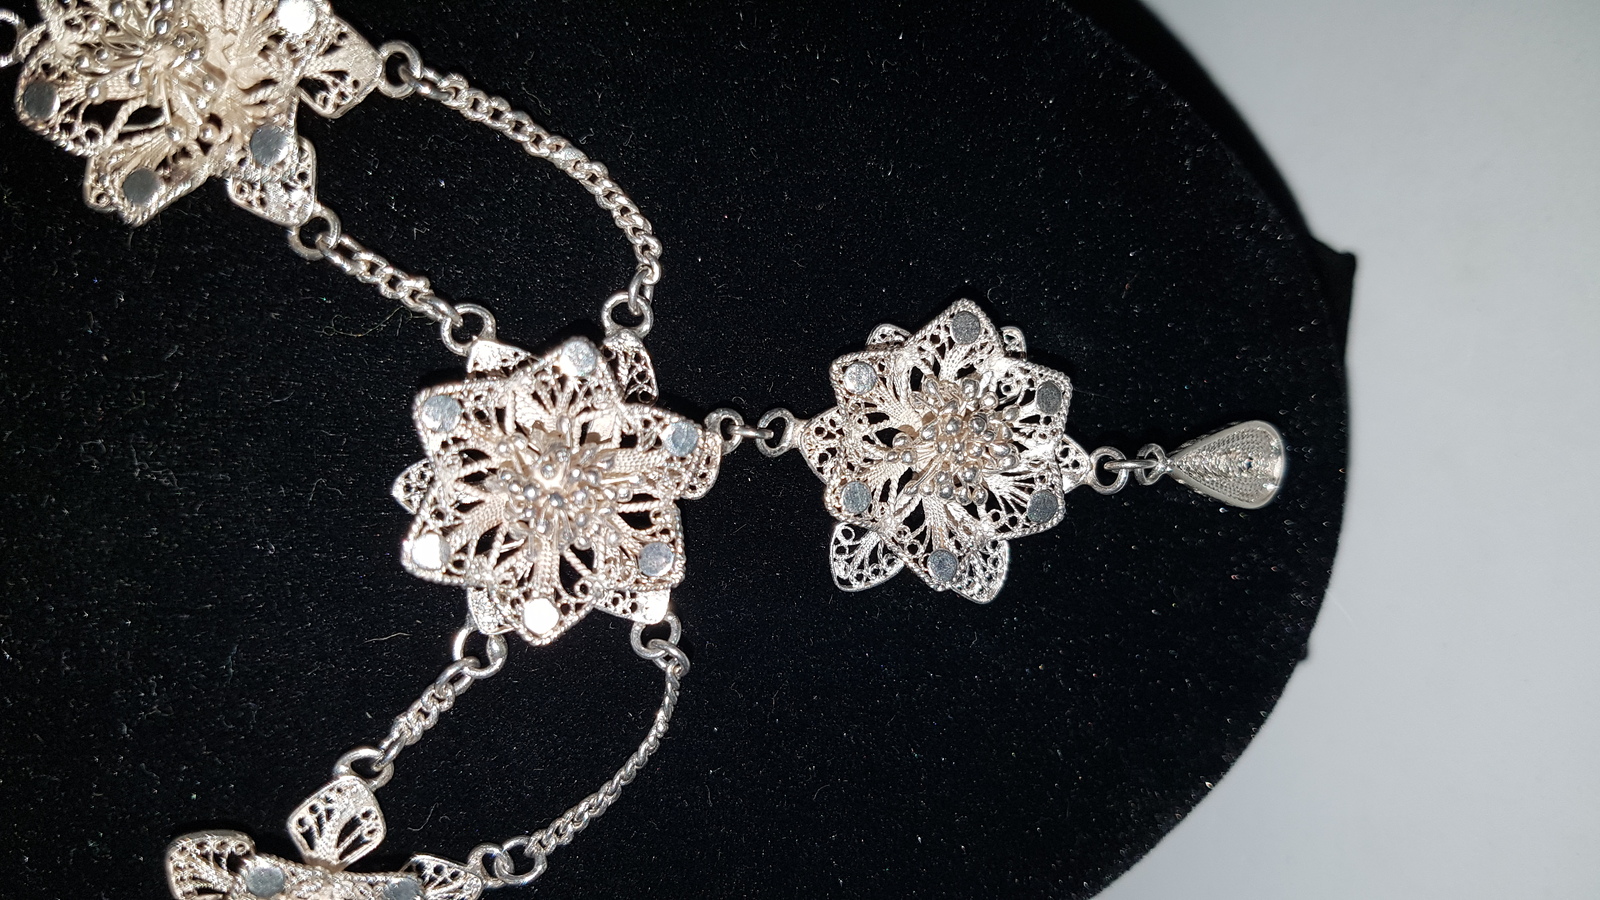 Tested Silver Filigree Necklace With Chain